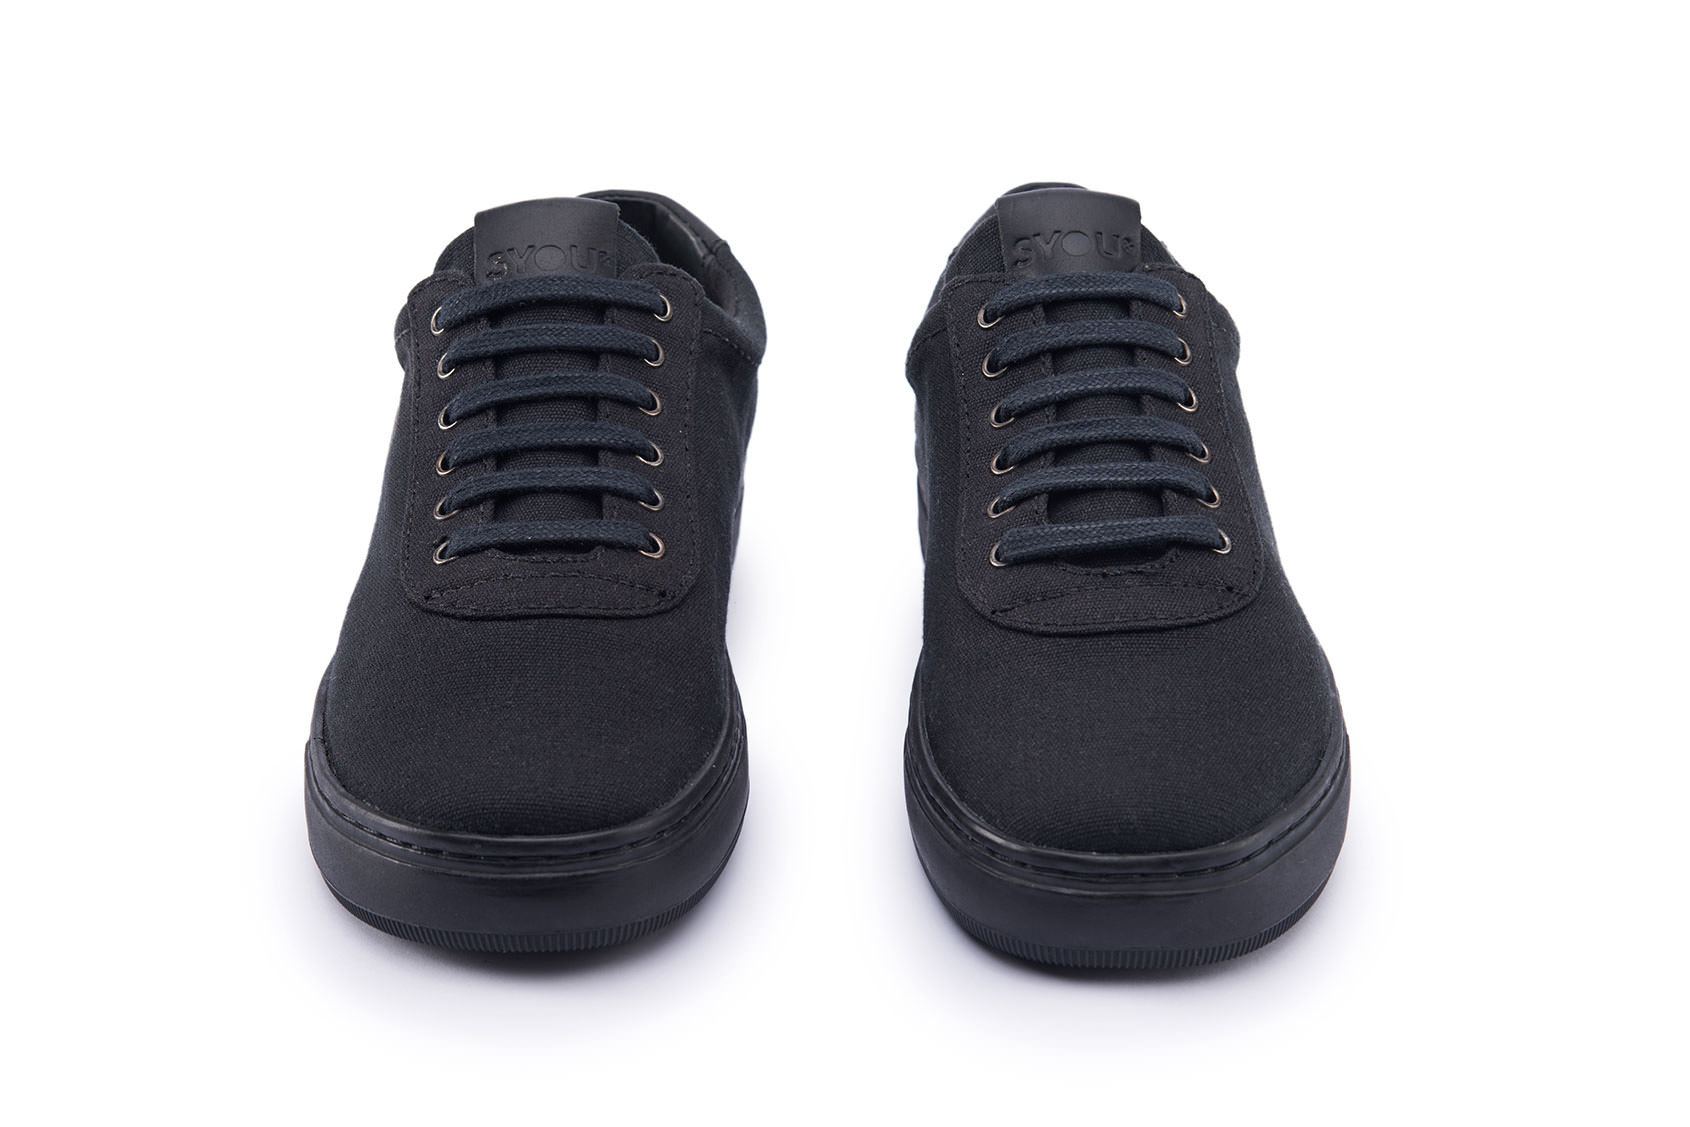 Co 13 all black sneakers syou front